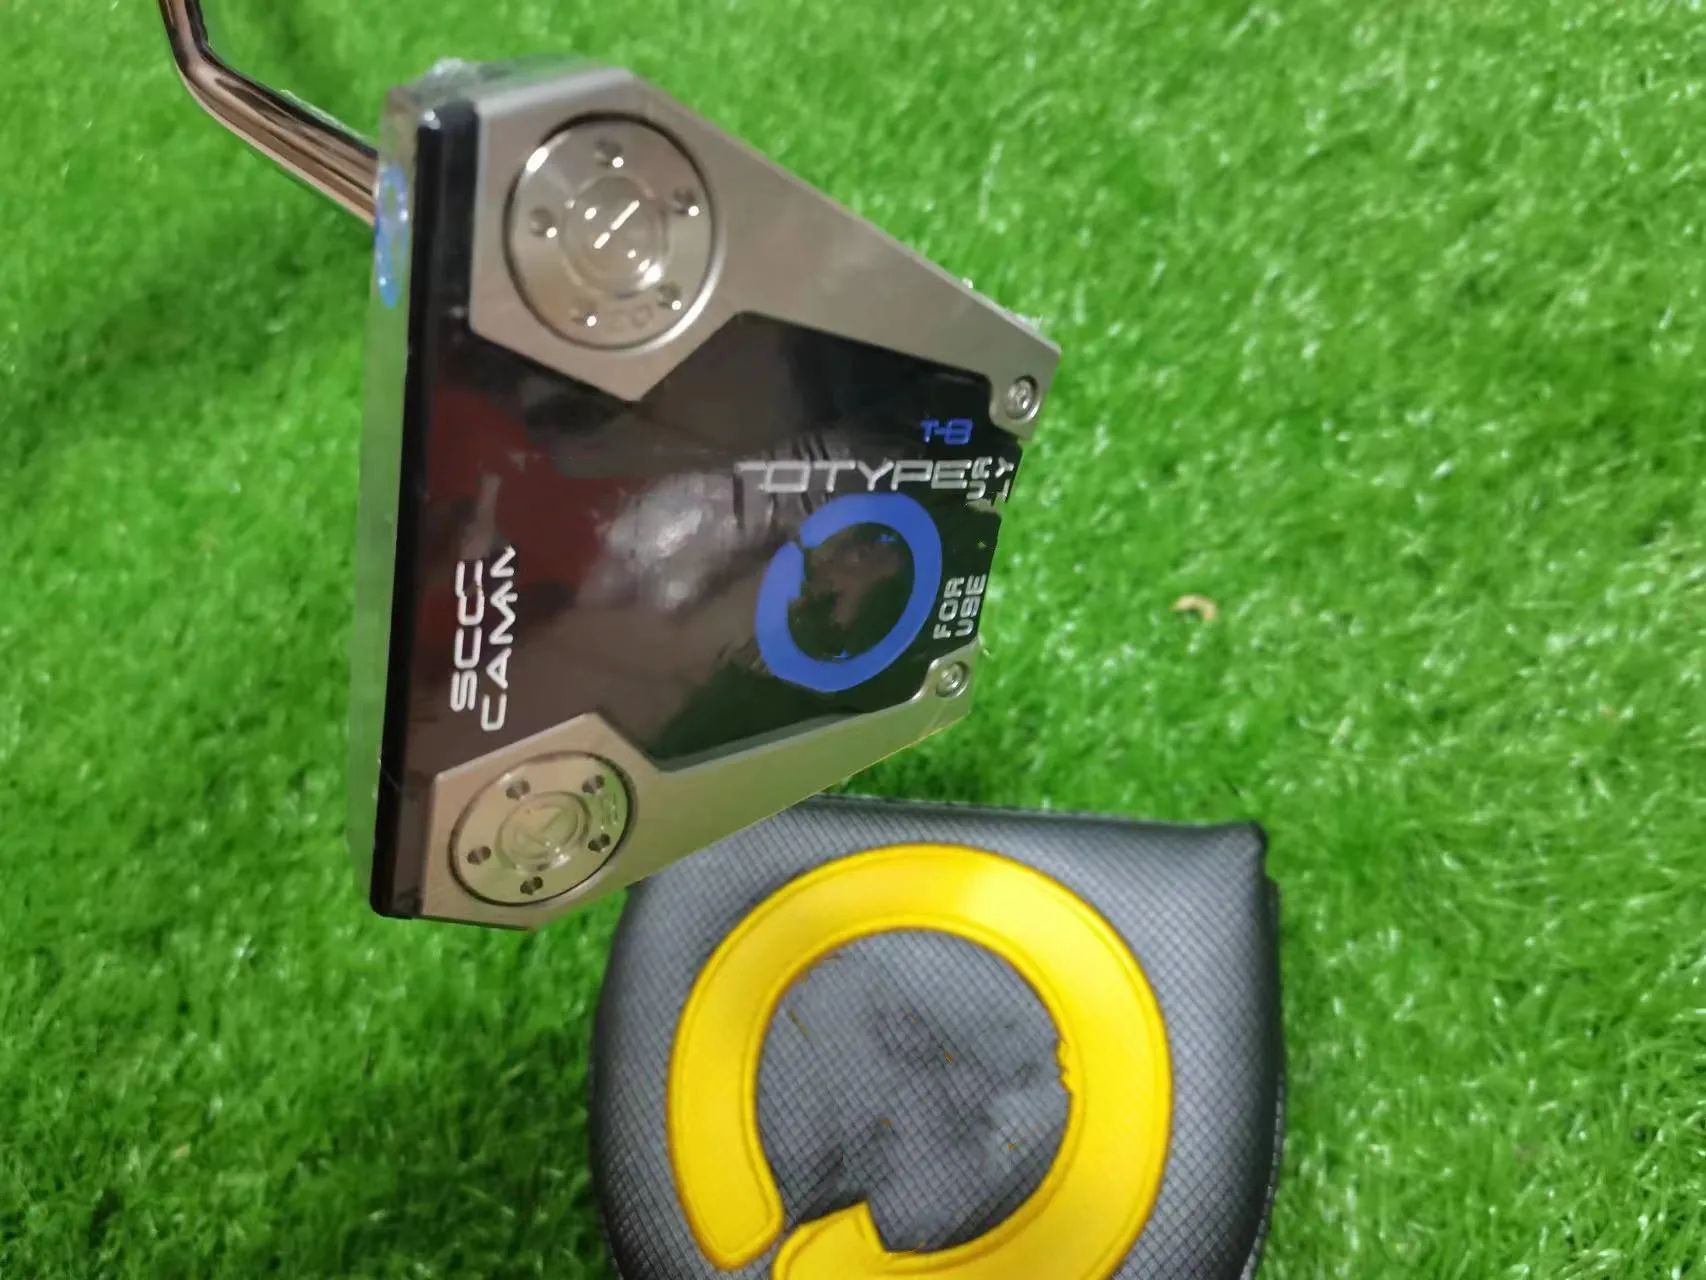 

Freeshiping FedEx. Prototype T8 T-8 Golf Putter Golf Putters Club Clubs Come with Cover and Wrench. The Weights is Removable